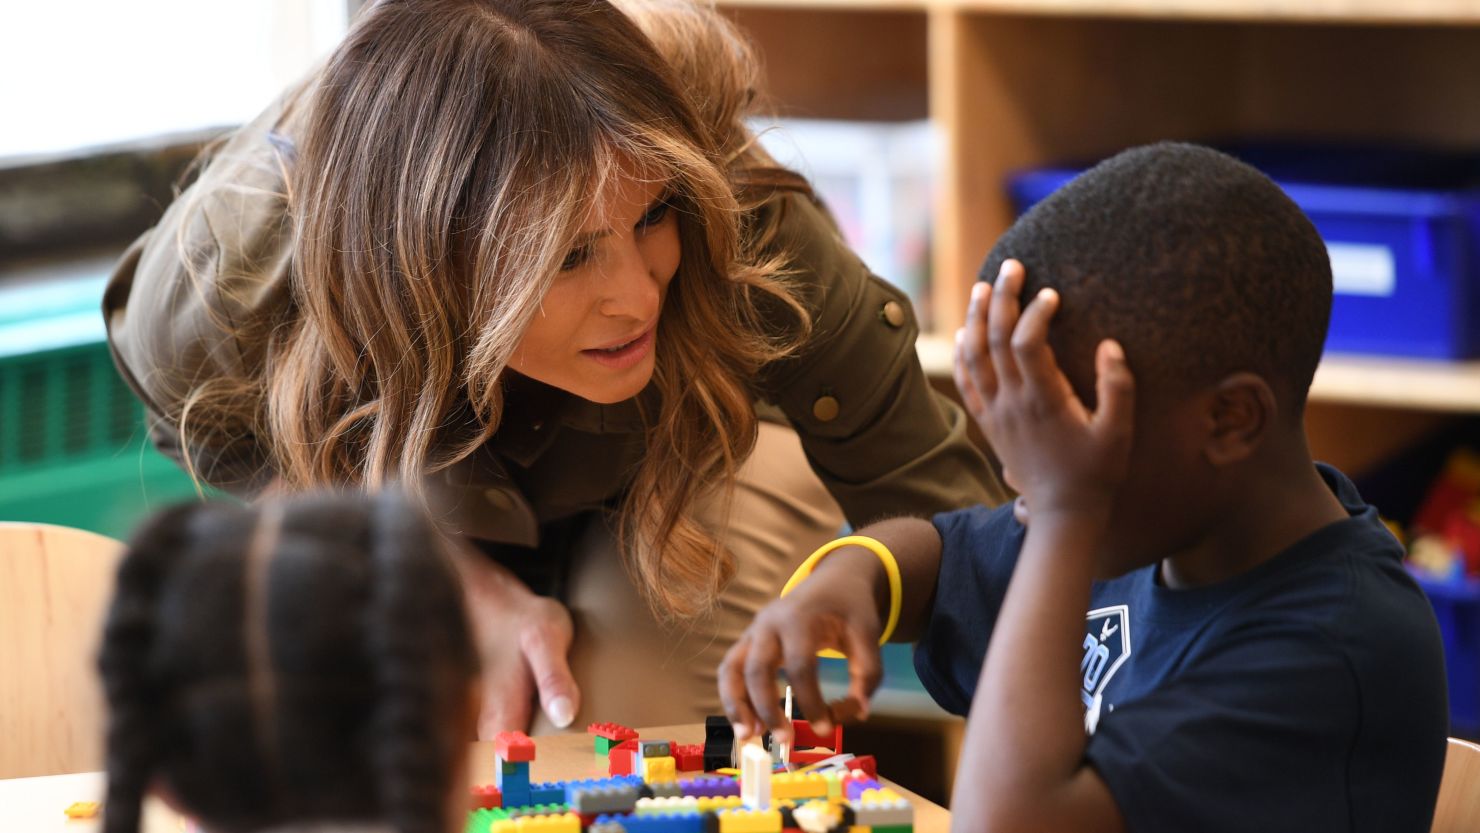 First lady Melania Trump speaks with a student as she visits a youth centre at  Joint Andrews Airforce base, Maryland on September 15, 2017.